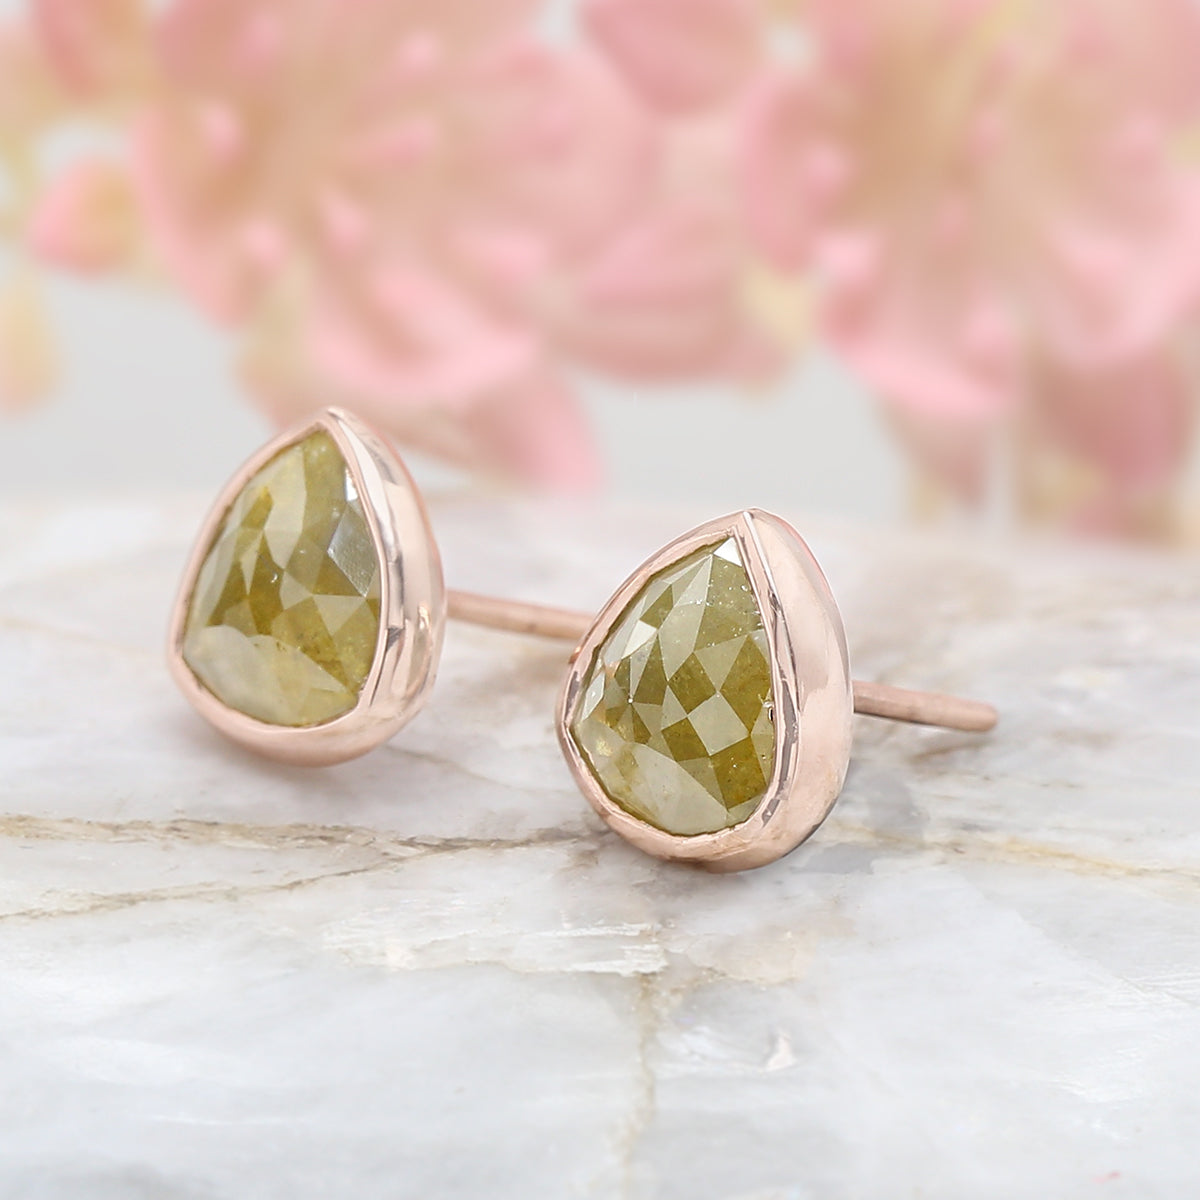 Pear Green Yellow Color Diamond Earring Engagement Wedding Gift Earring 14K Solid Rose White Yellow Gold Earring 2.26 CT KDN7025